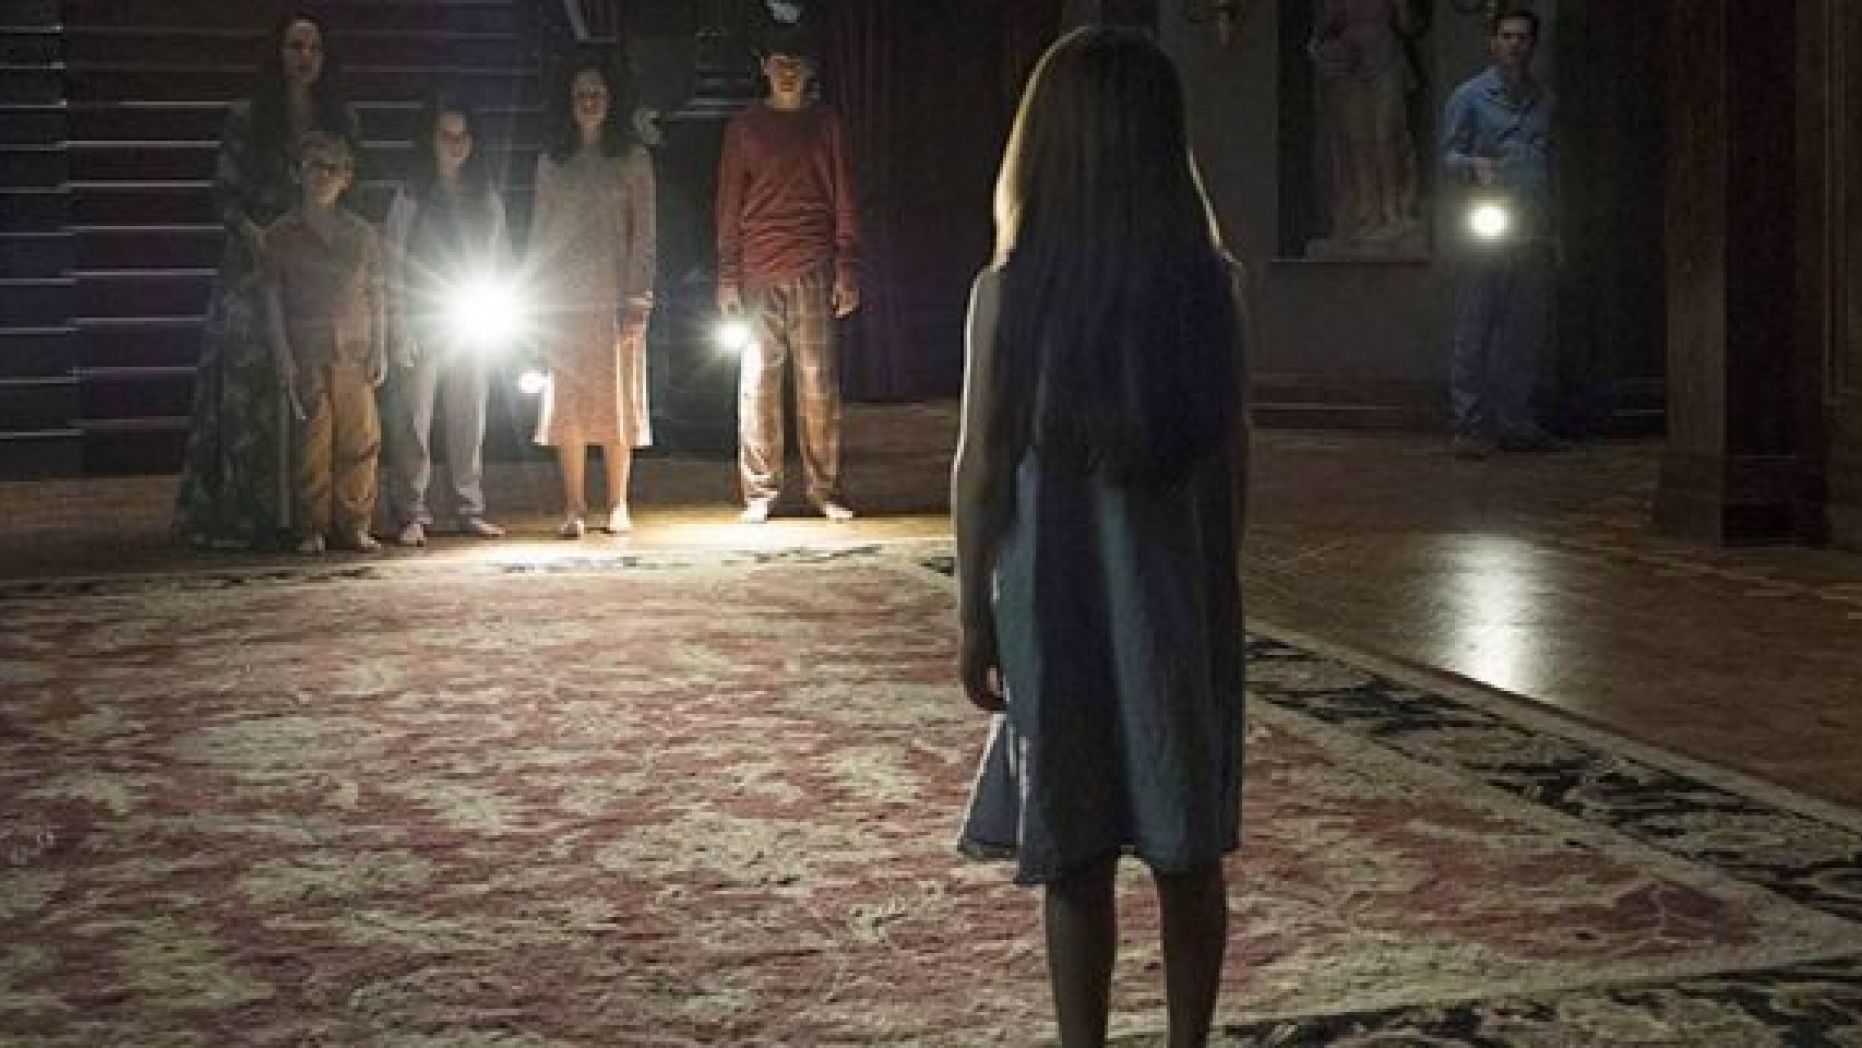 "The Haunting of Hill House" will be returning for a second season but as a new chapter titled, "The Haunting of Bly Manor.: